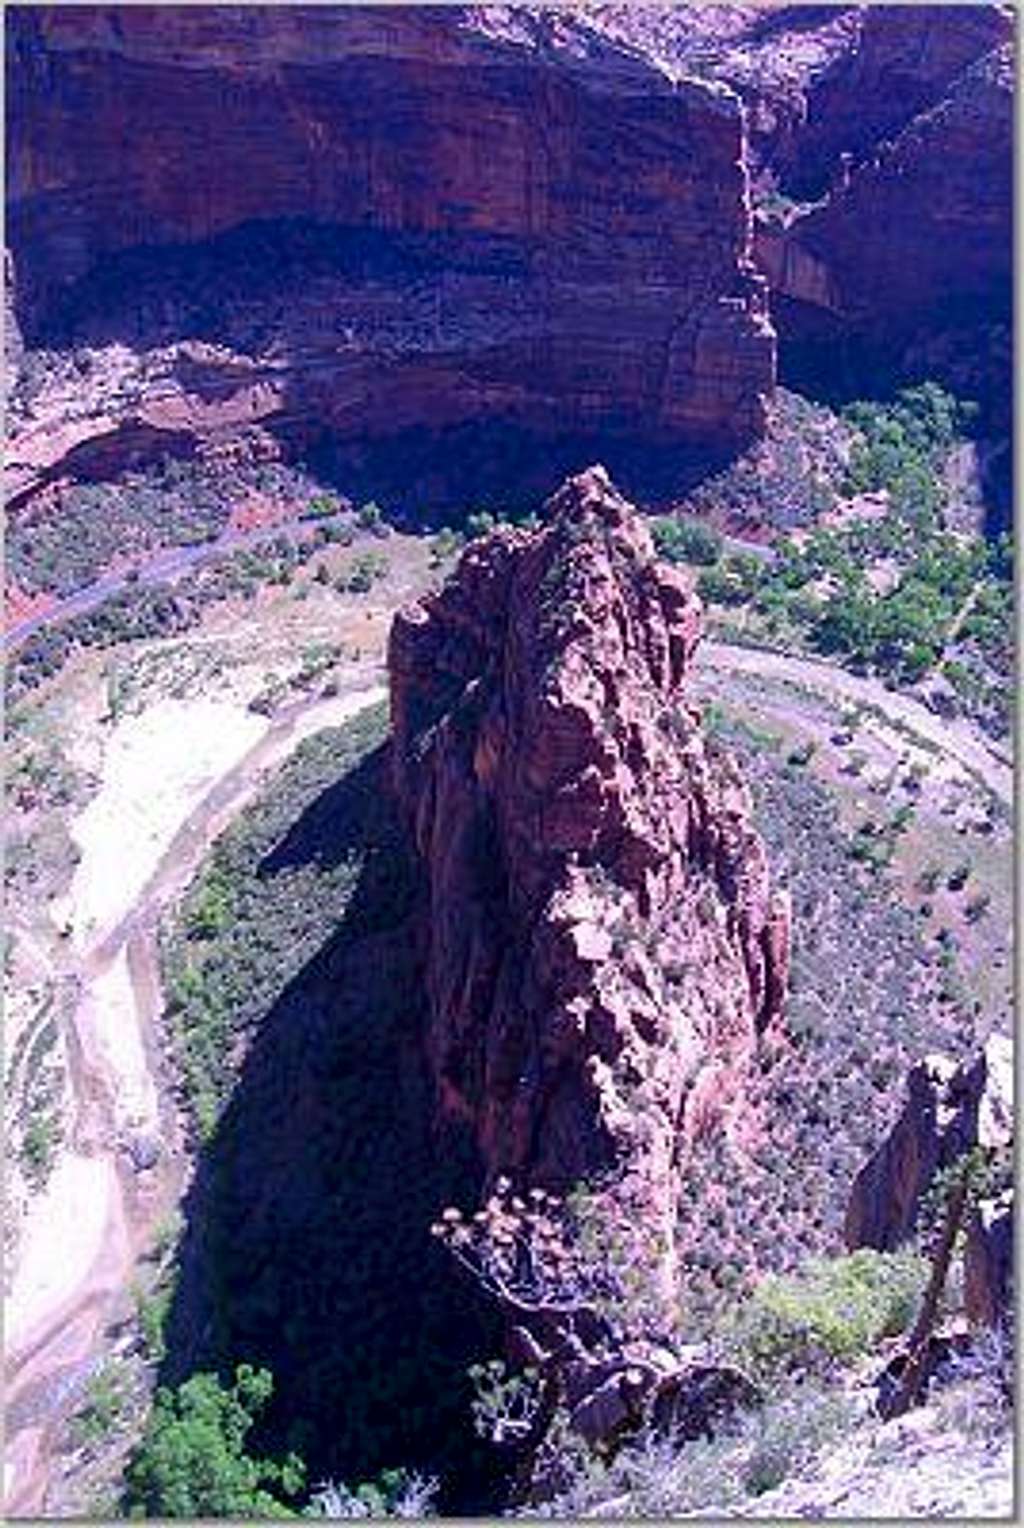 The Organ, Zion National Park